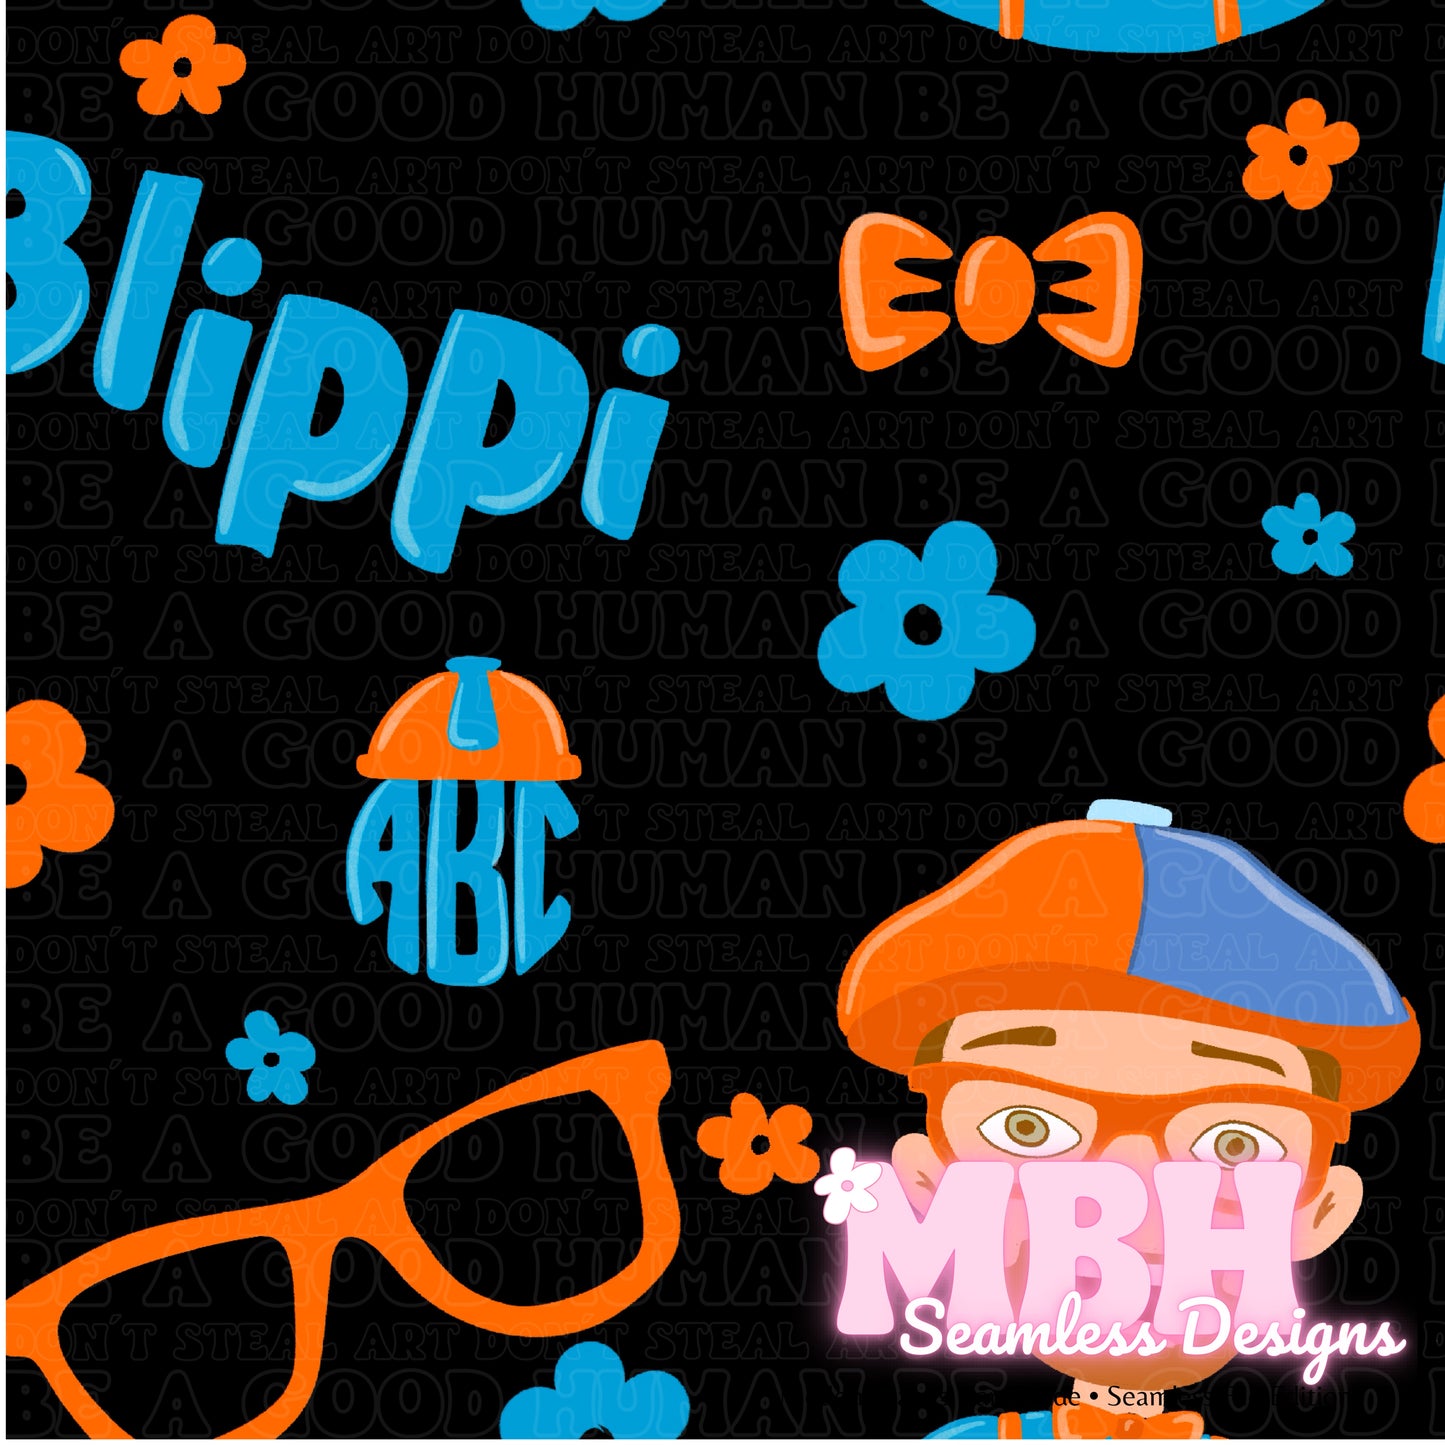 Floral Blippi Seamless Pattern MULTIPLE COLORWAYS